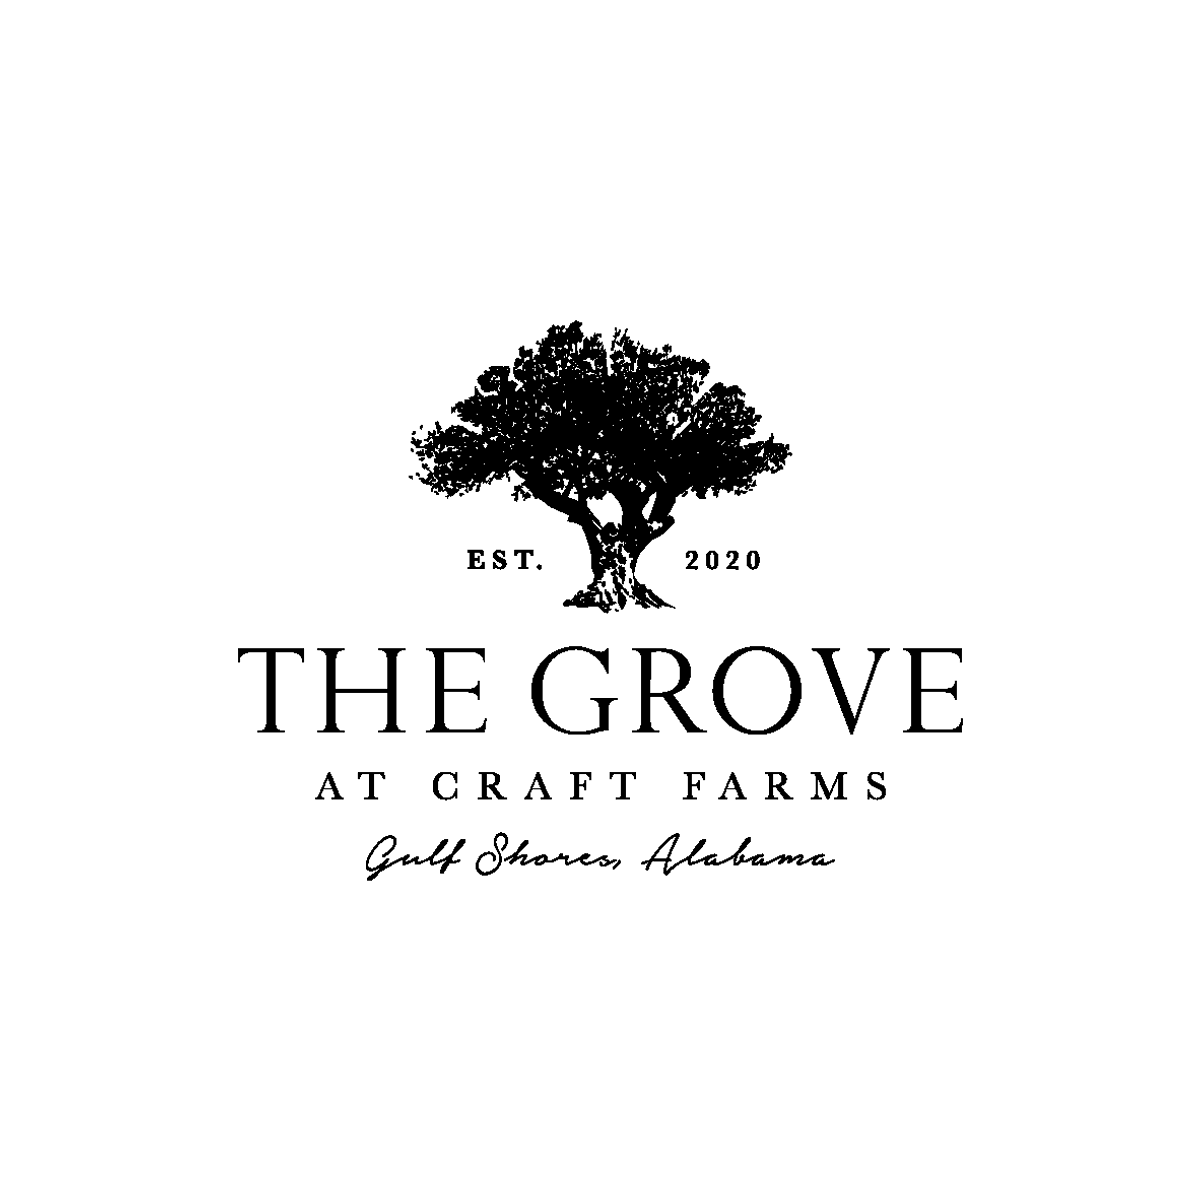 The Grove at Craft Farms